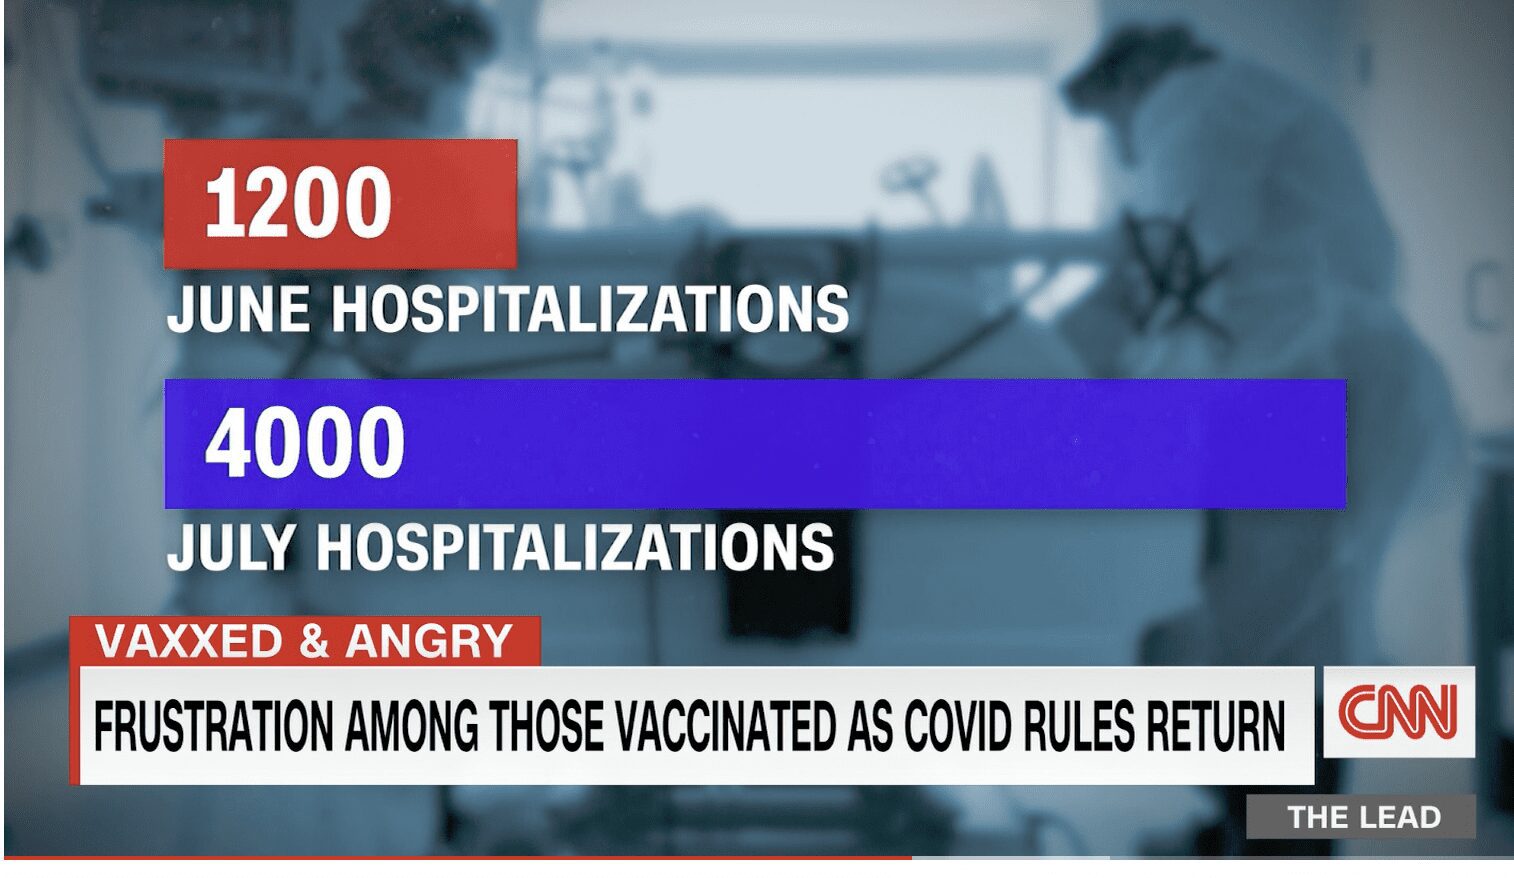 Some vaccinated Americans have lost their patience with those refusing the shot as Covid-19 cases surge and mandates return